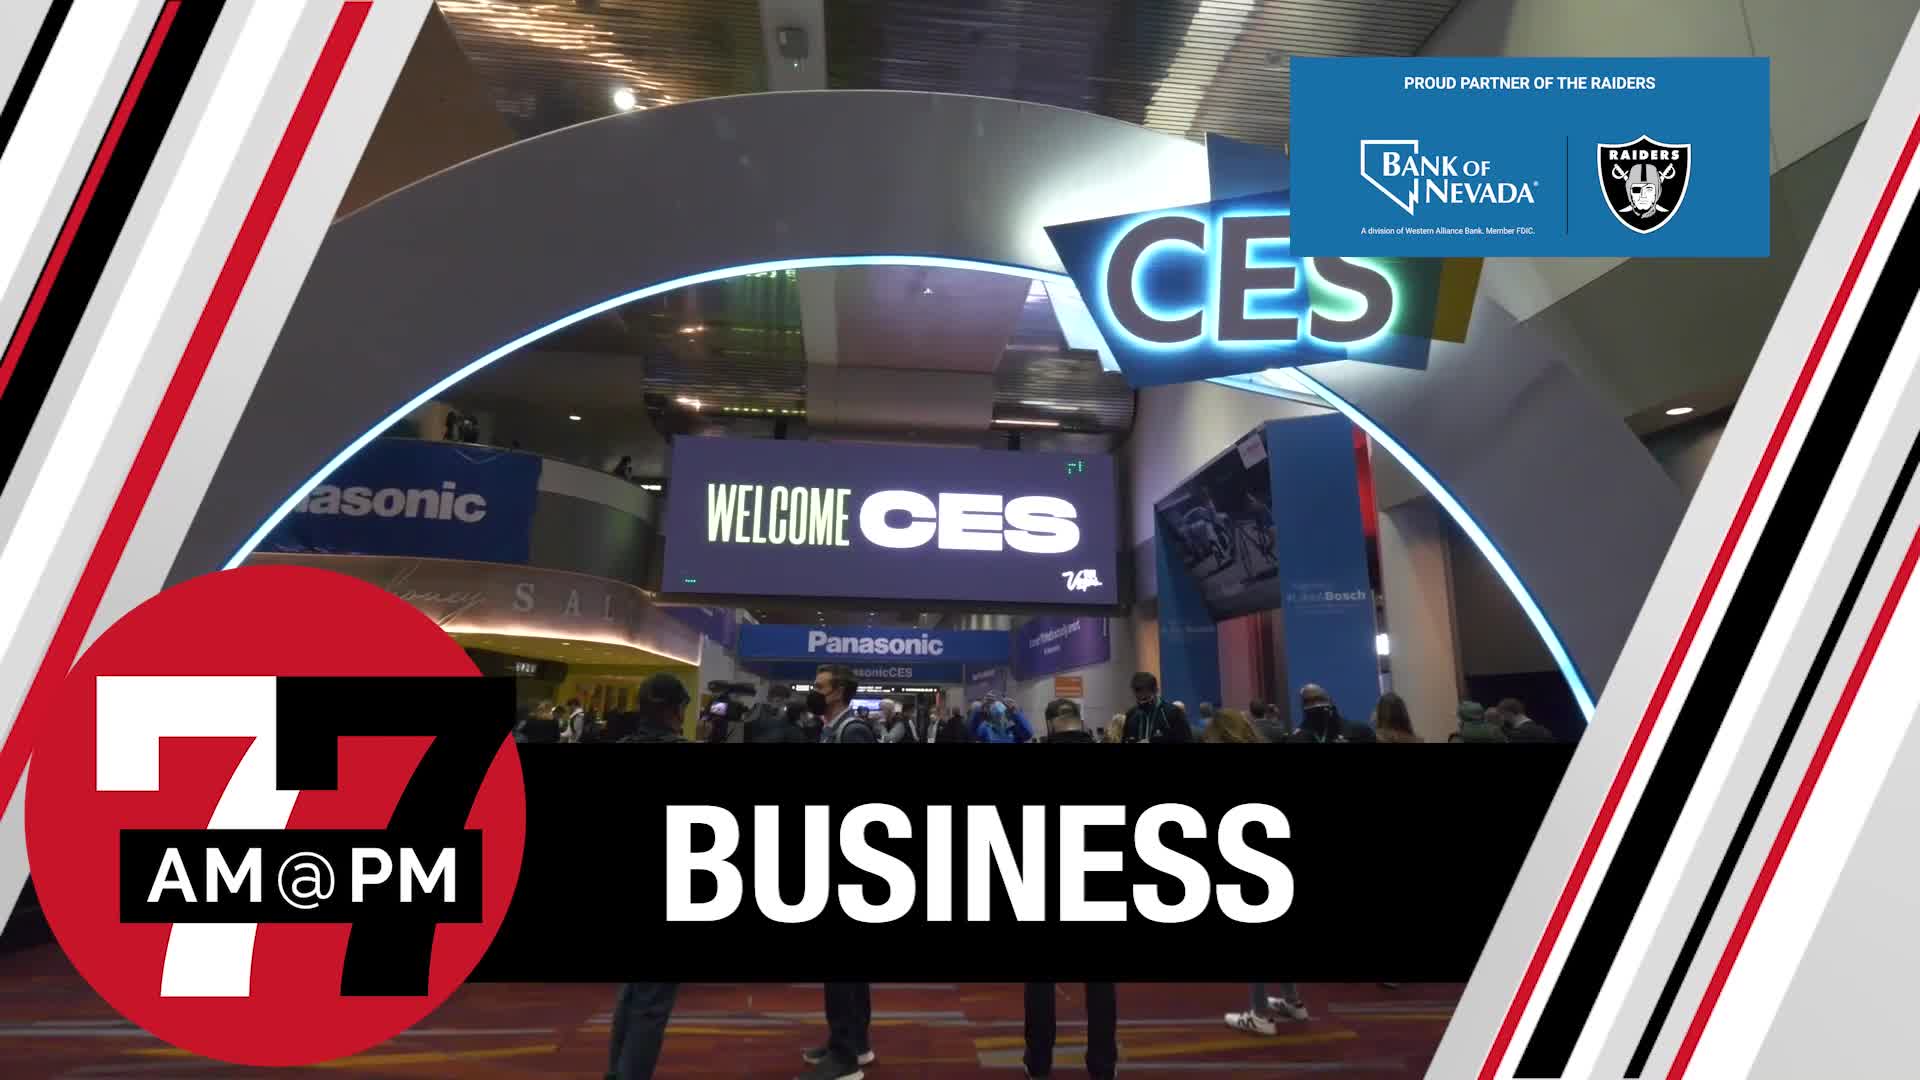 CES Attendance Down Due to Covid